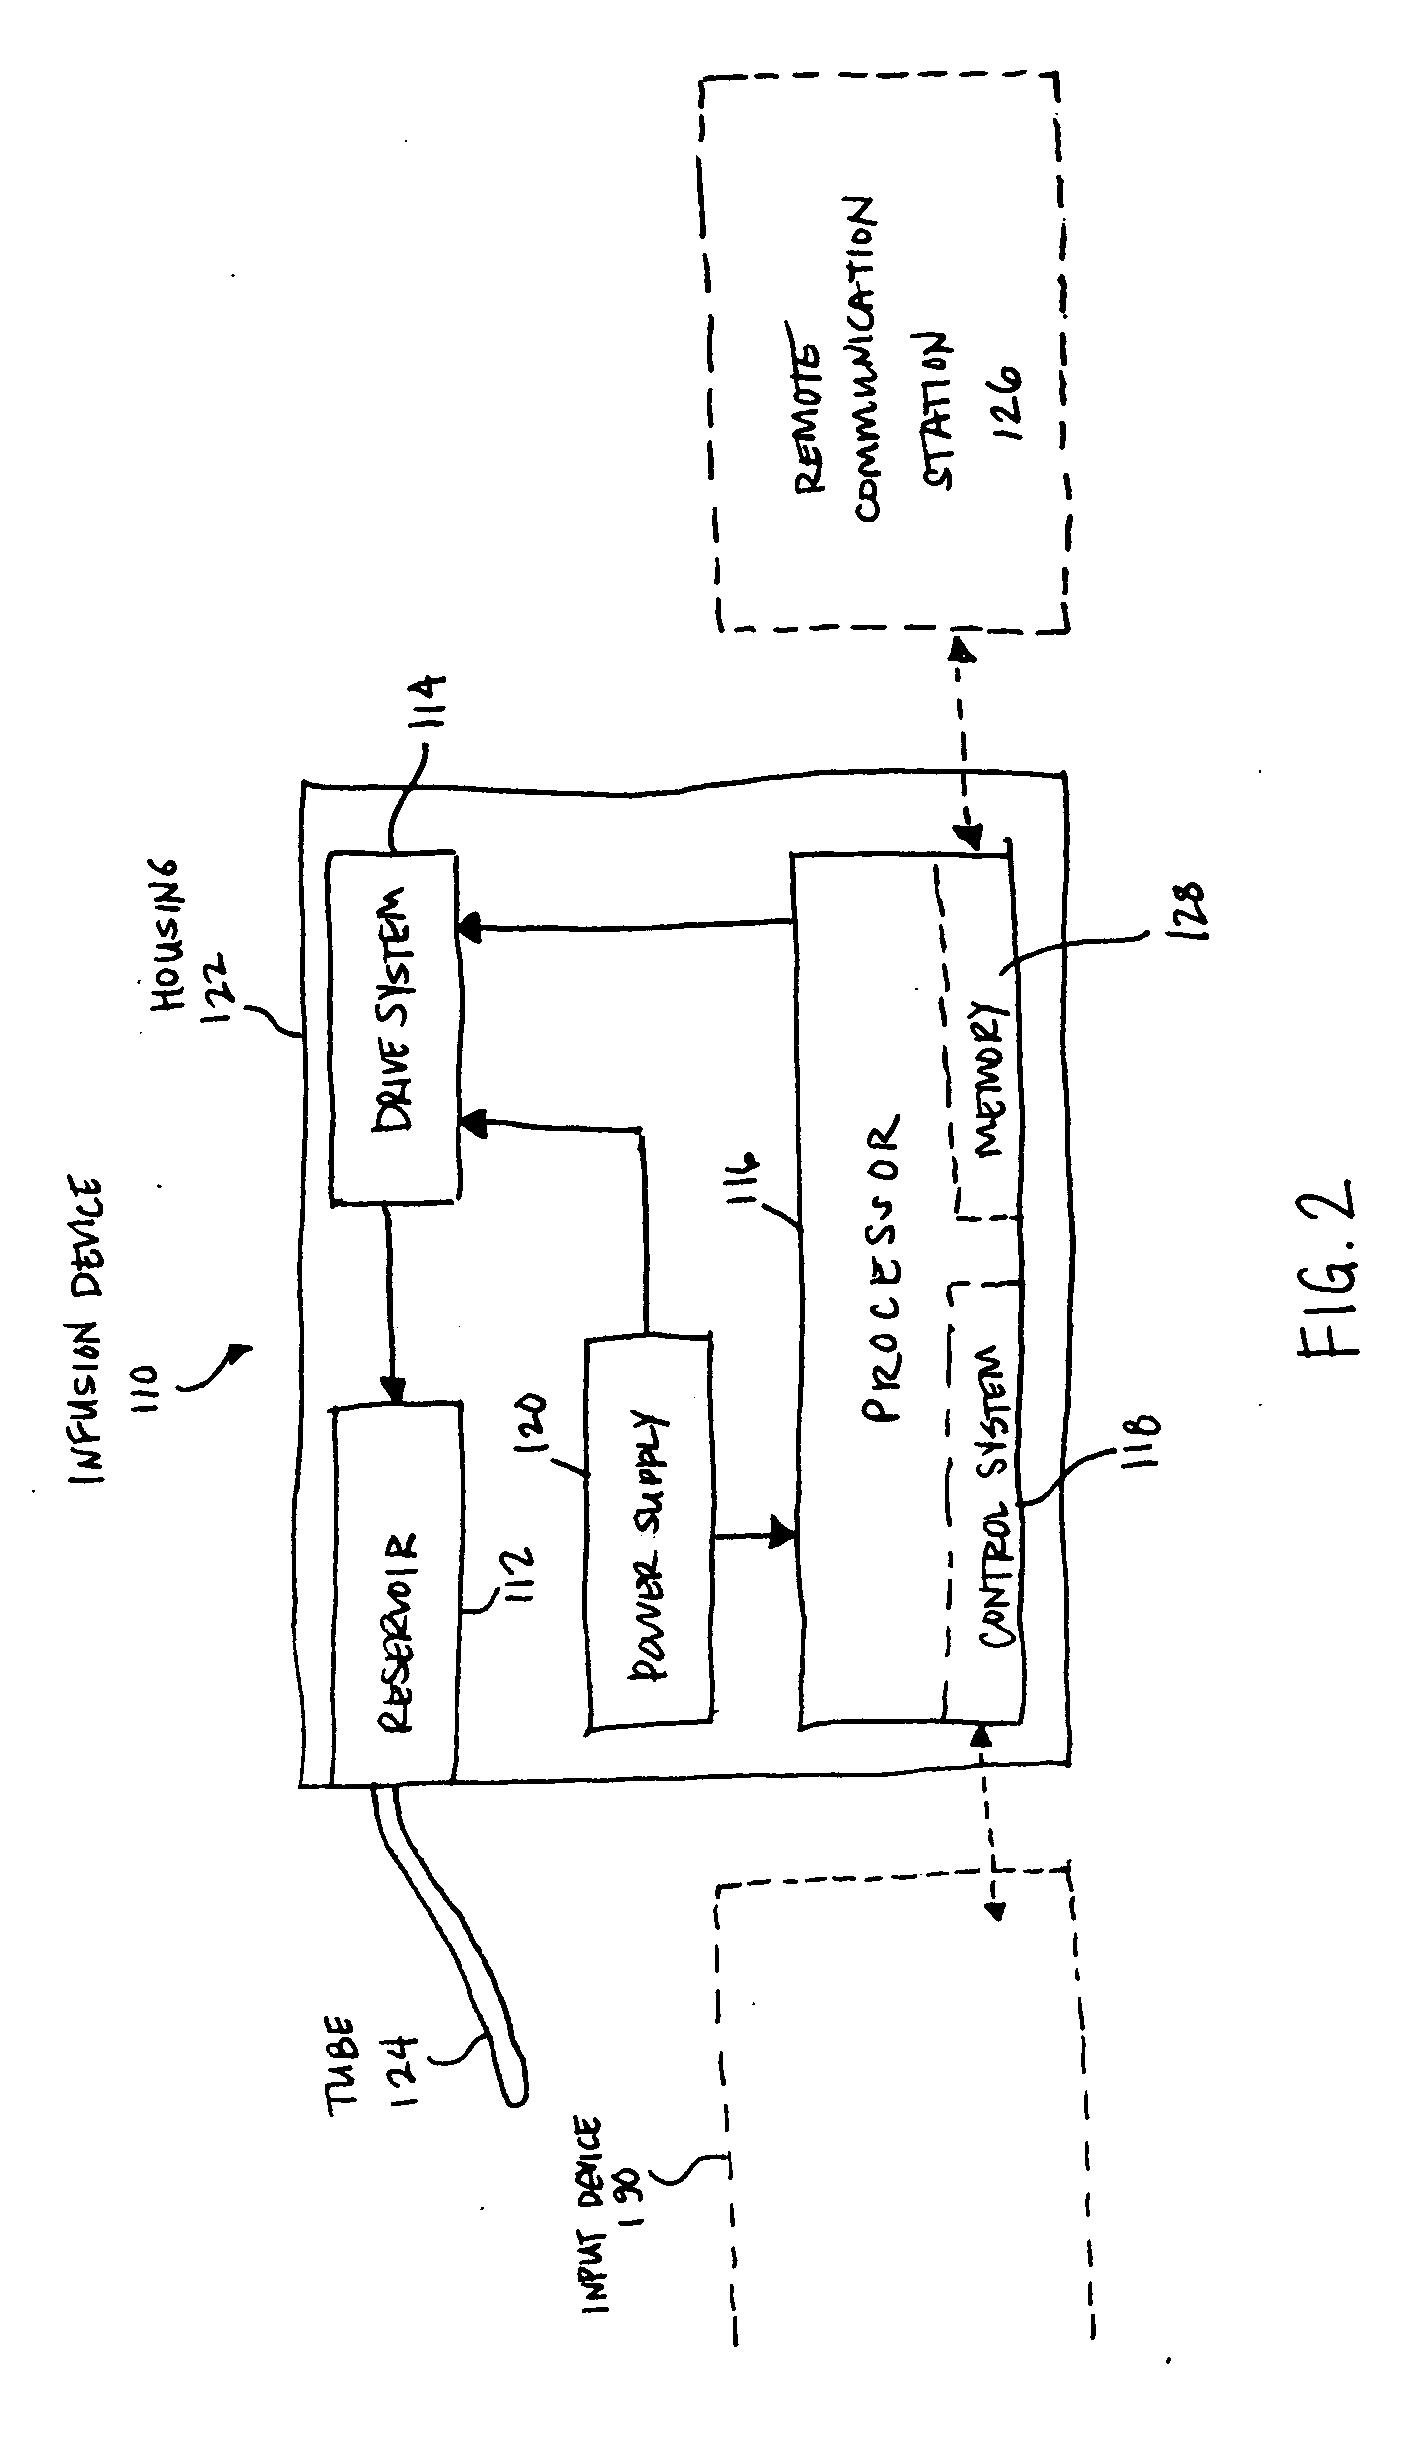 Systems and methods for entering temporary basal rate pattern in an infusion device